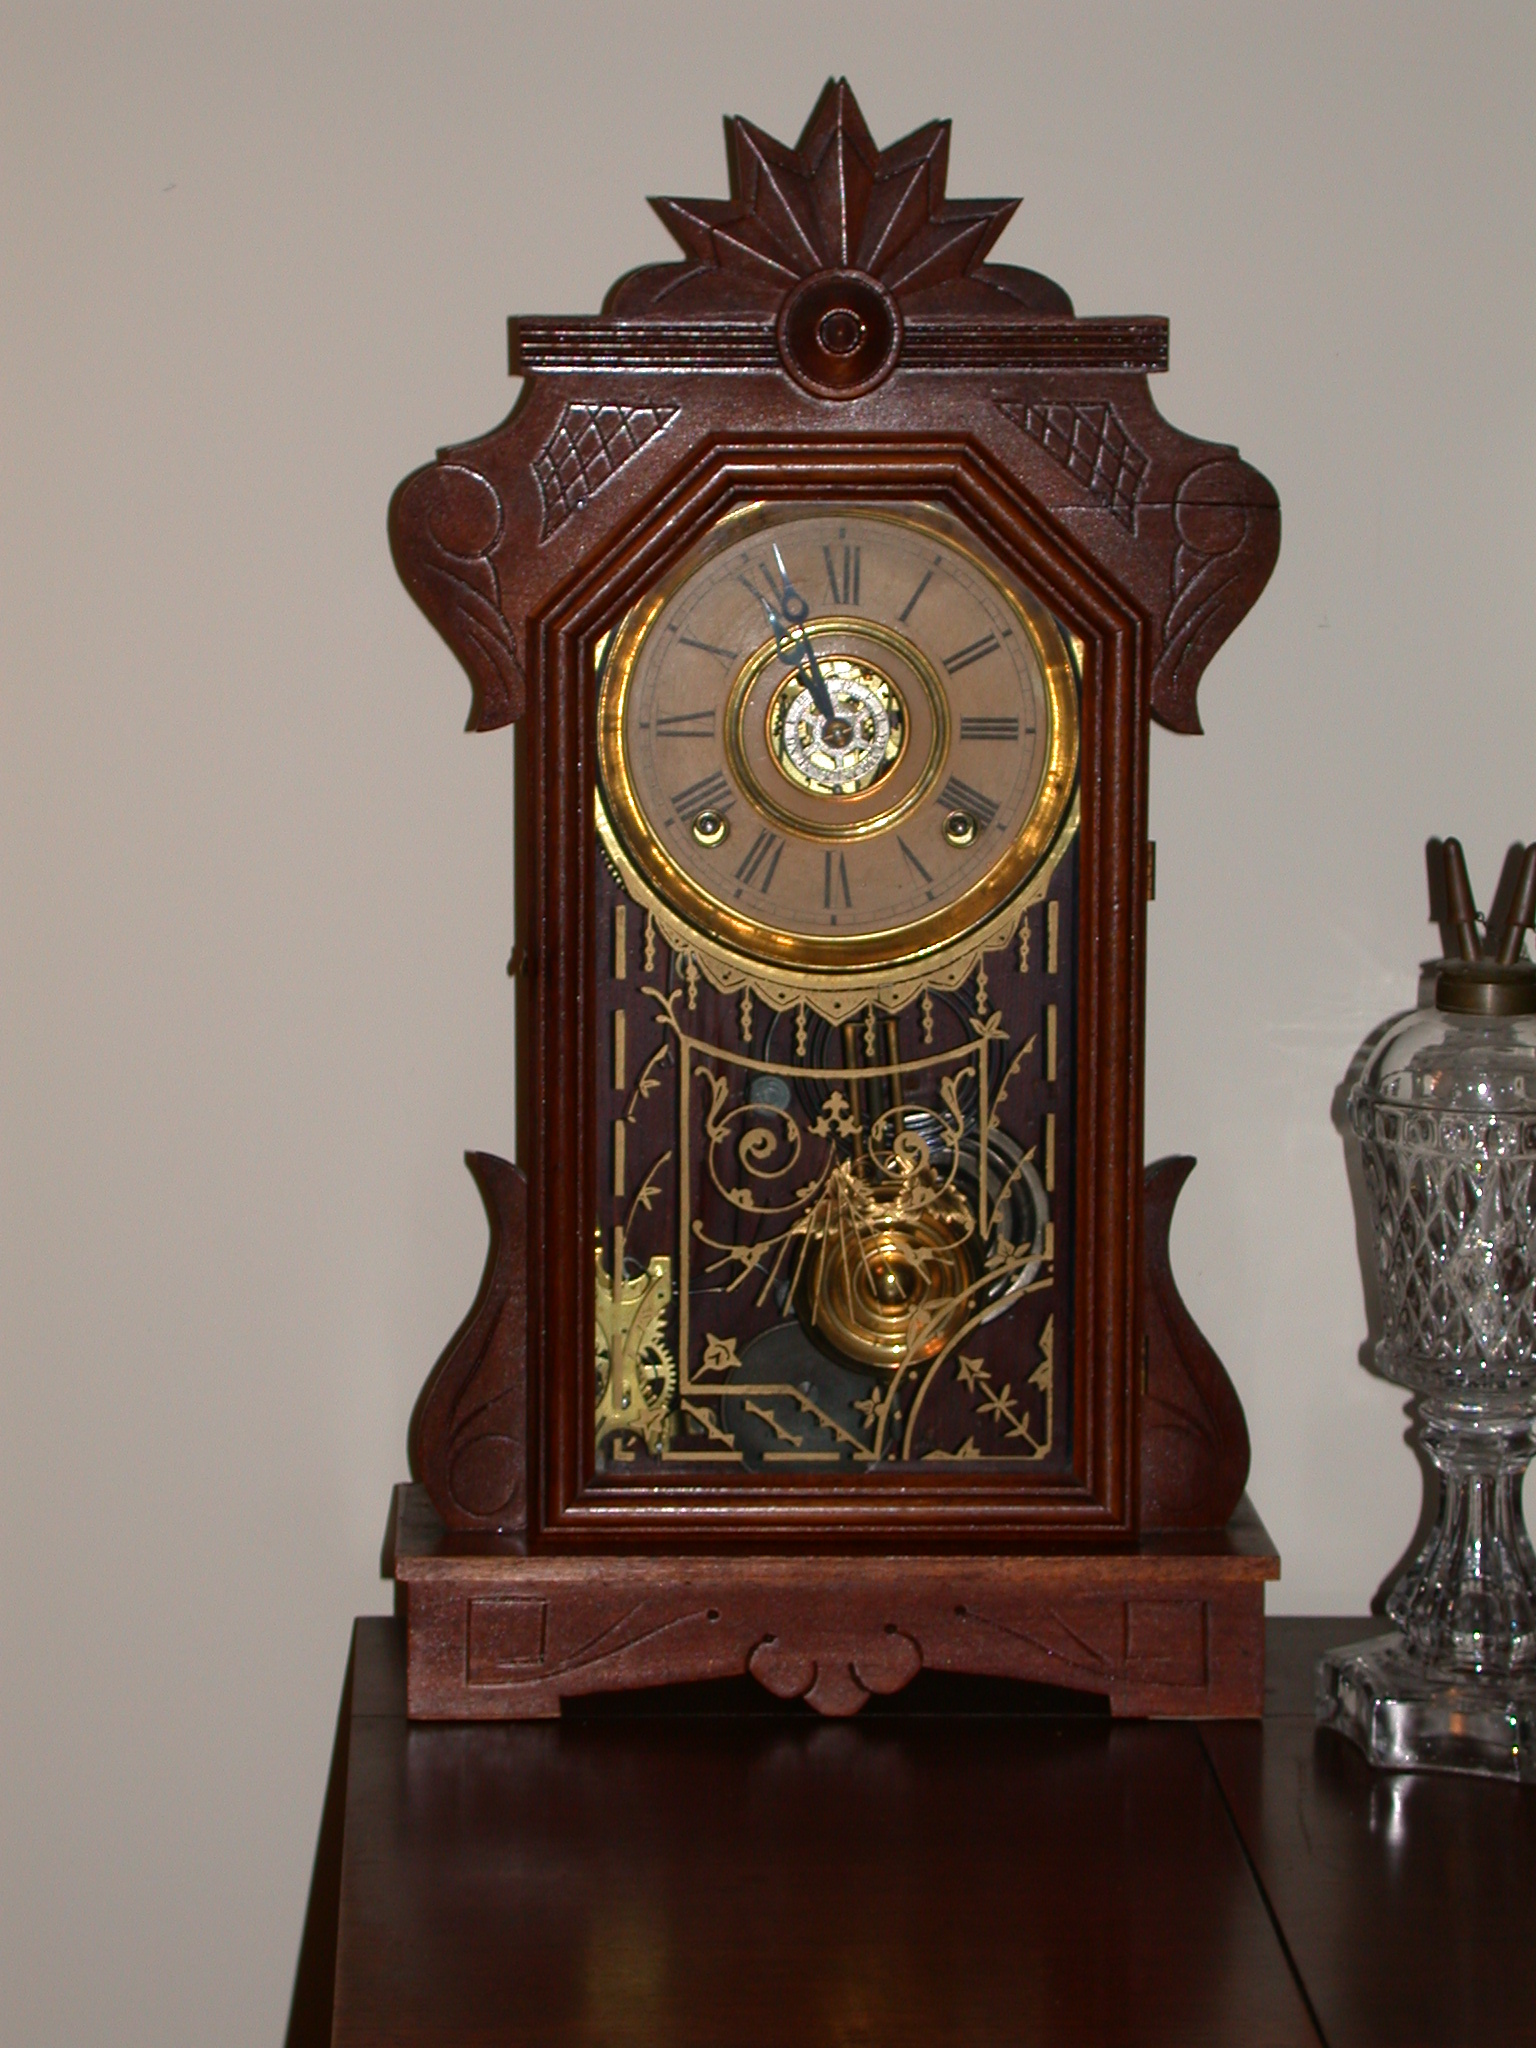 fastcat.org : Gallery: Miscellany : First Pictures : #10 : Antique Clock